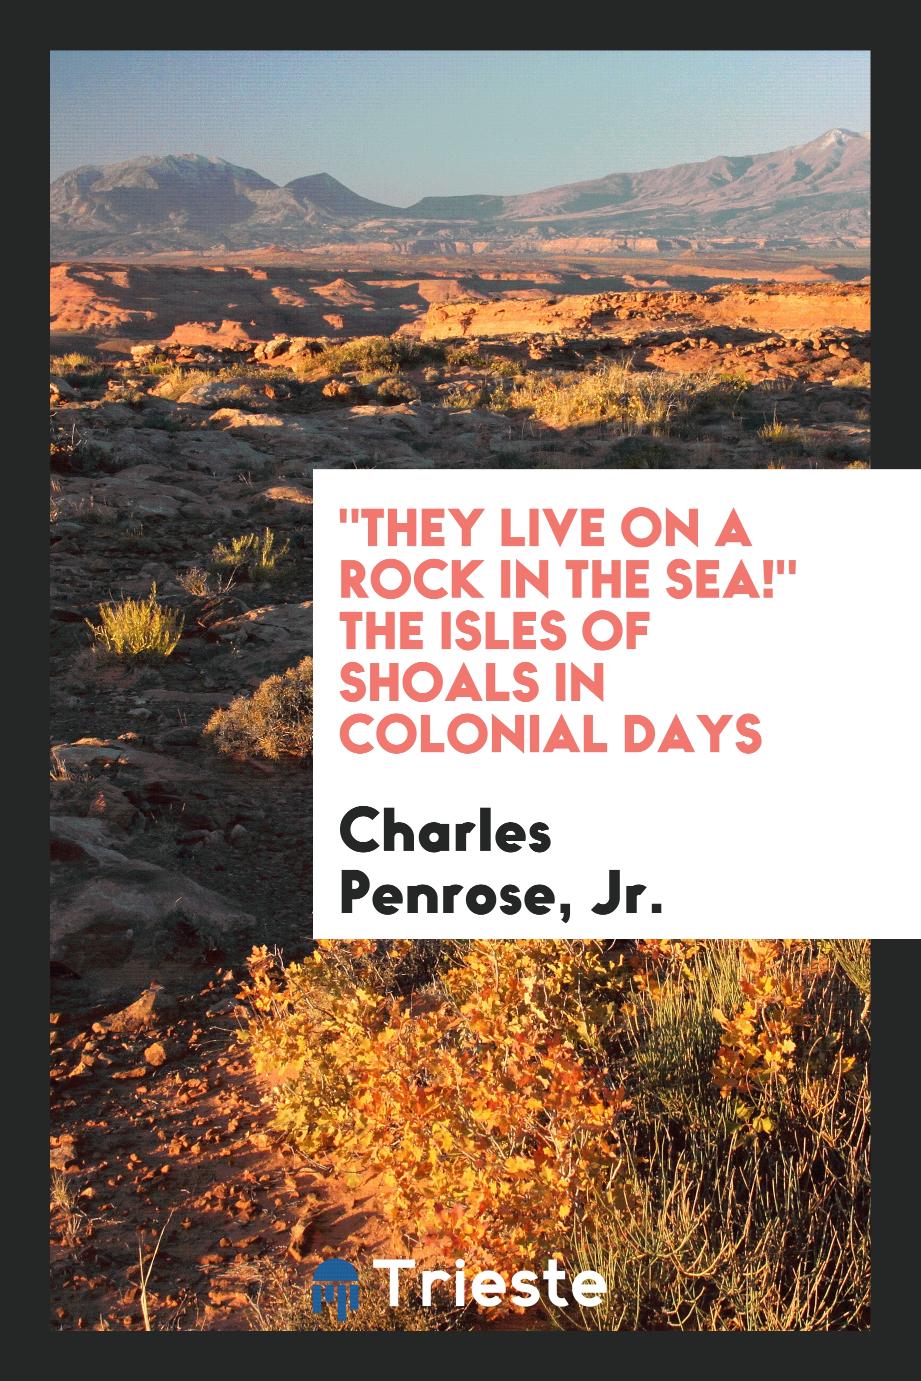 "They Live on a Rock in the Sea!" The Isles of Shoals in Colonial Days